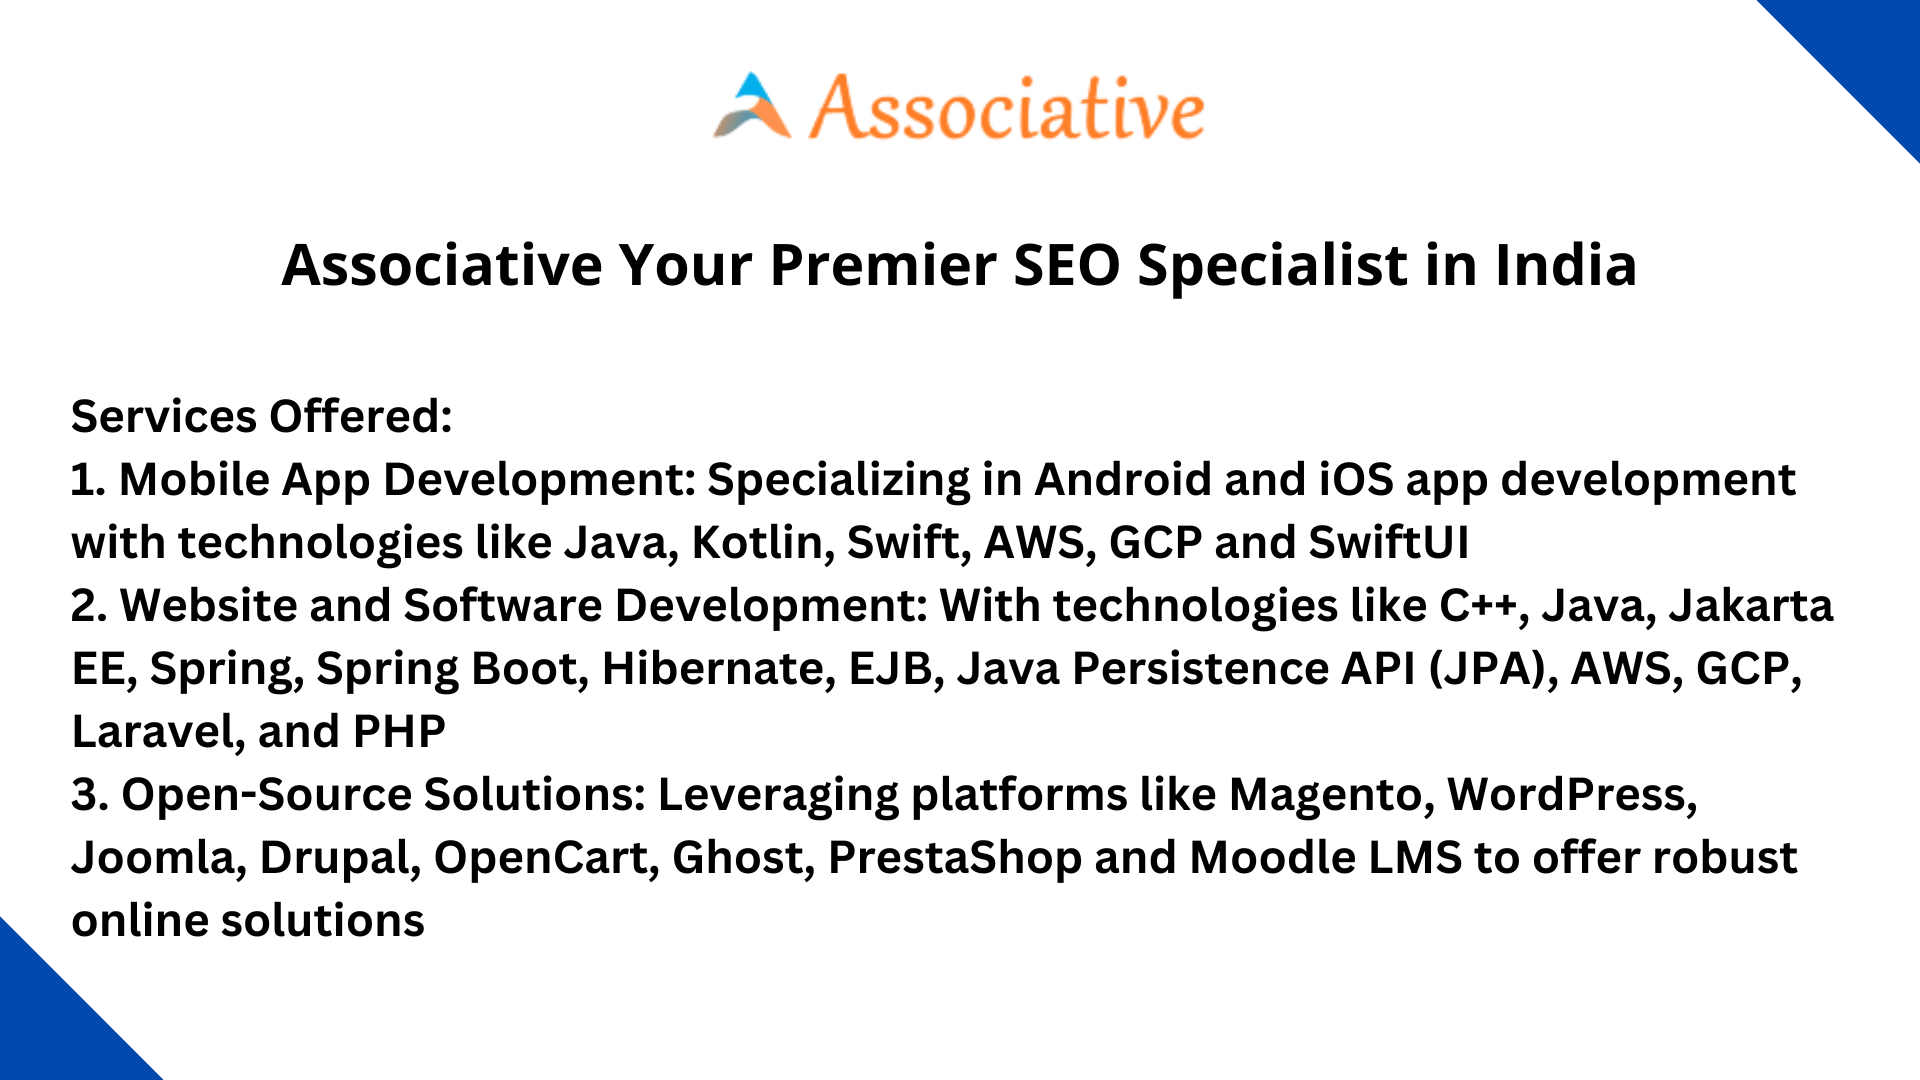 Associative Your Premier SEO Specialist in India